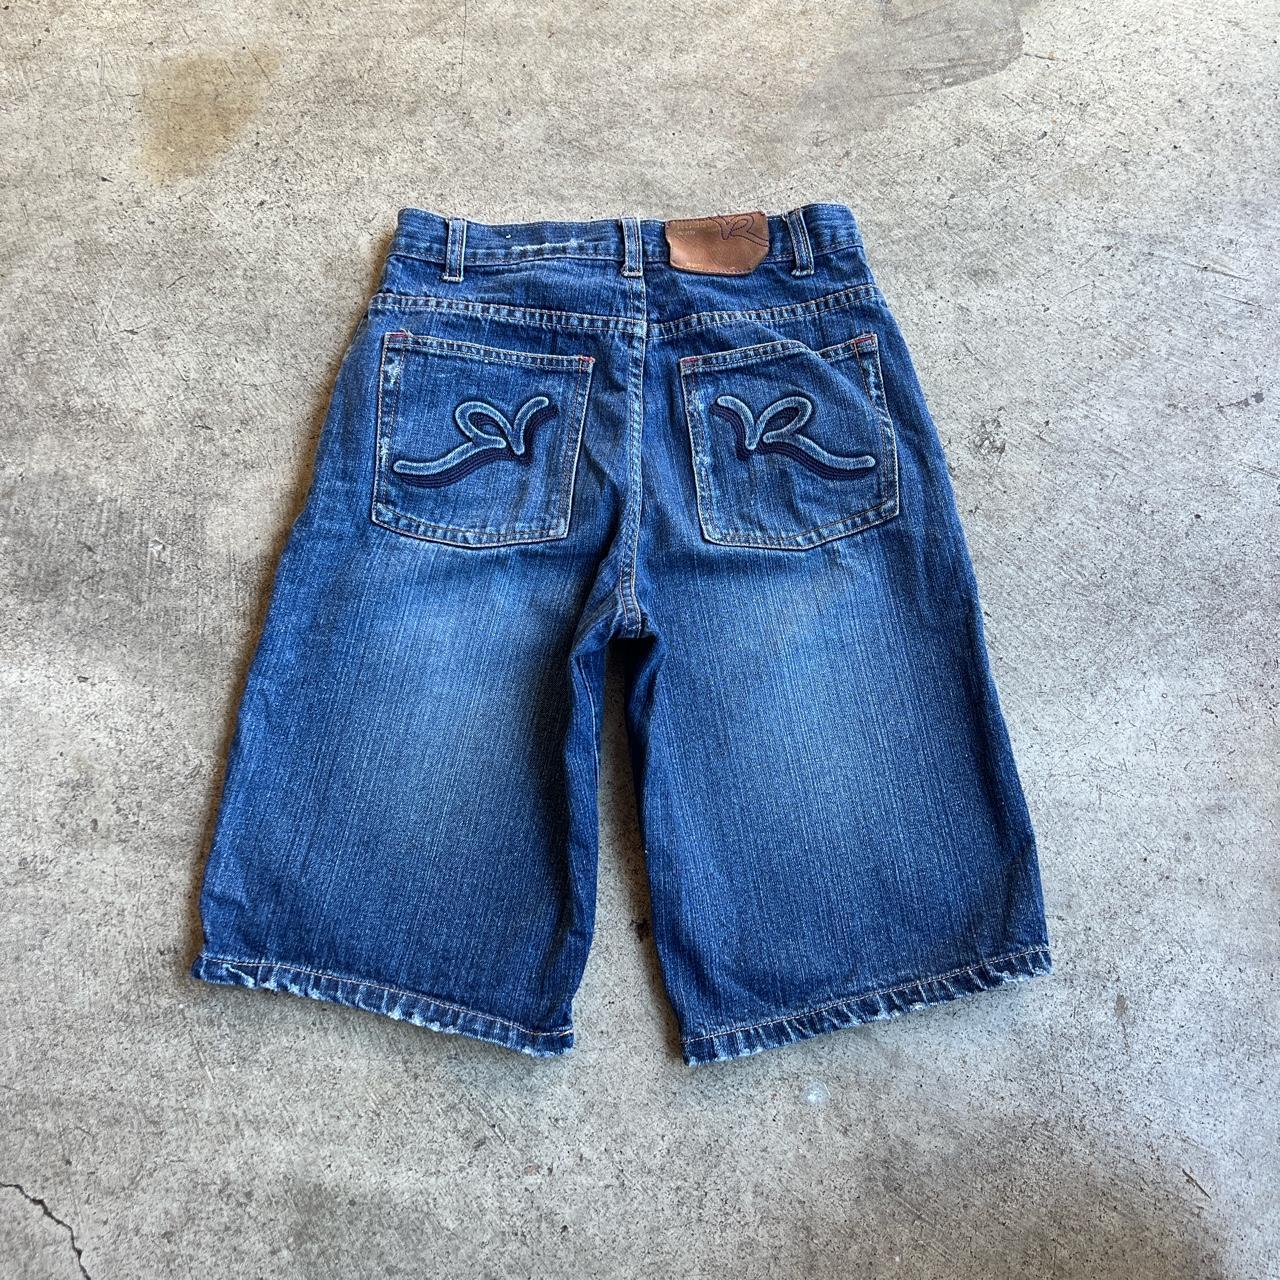 Y2K Vintage Rocawear Jorts With beautiful fade to... - Depop